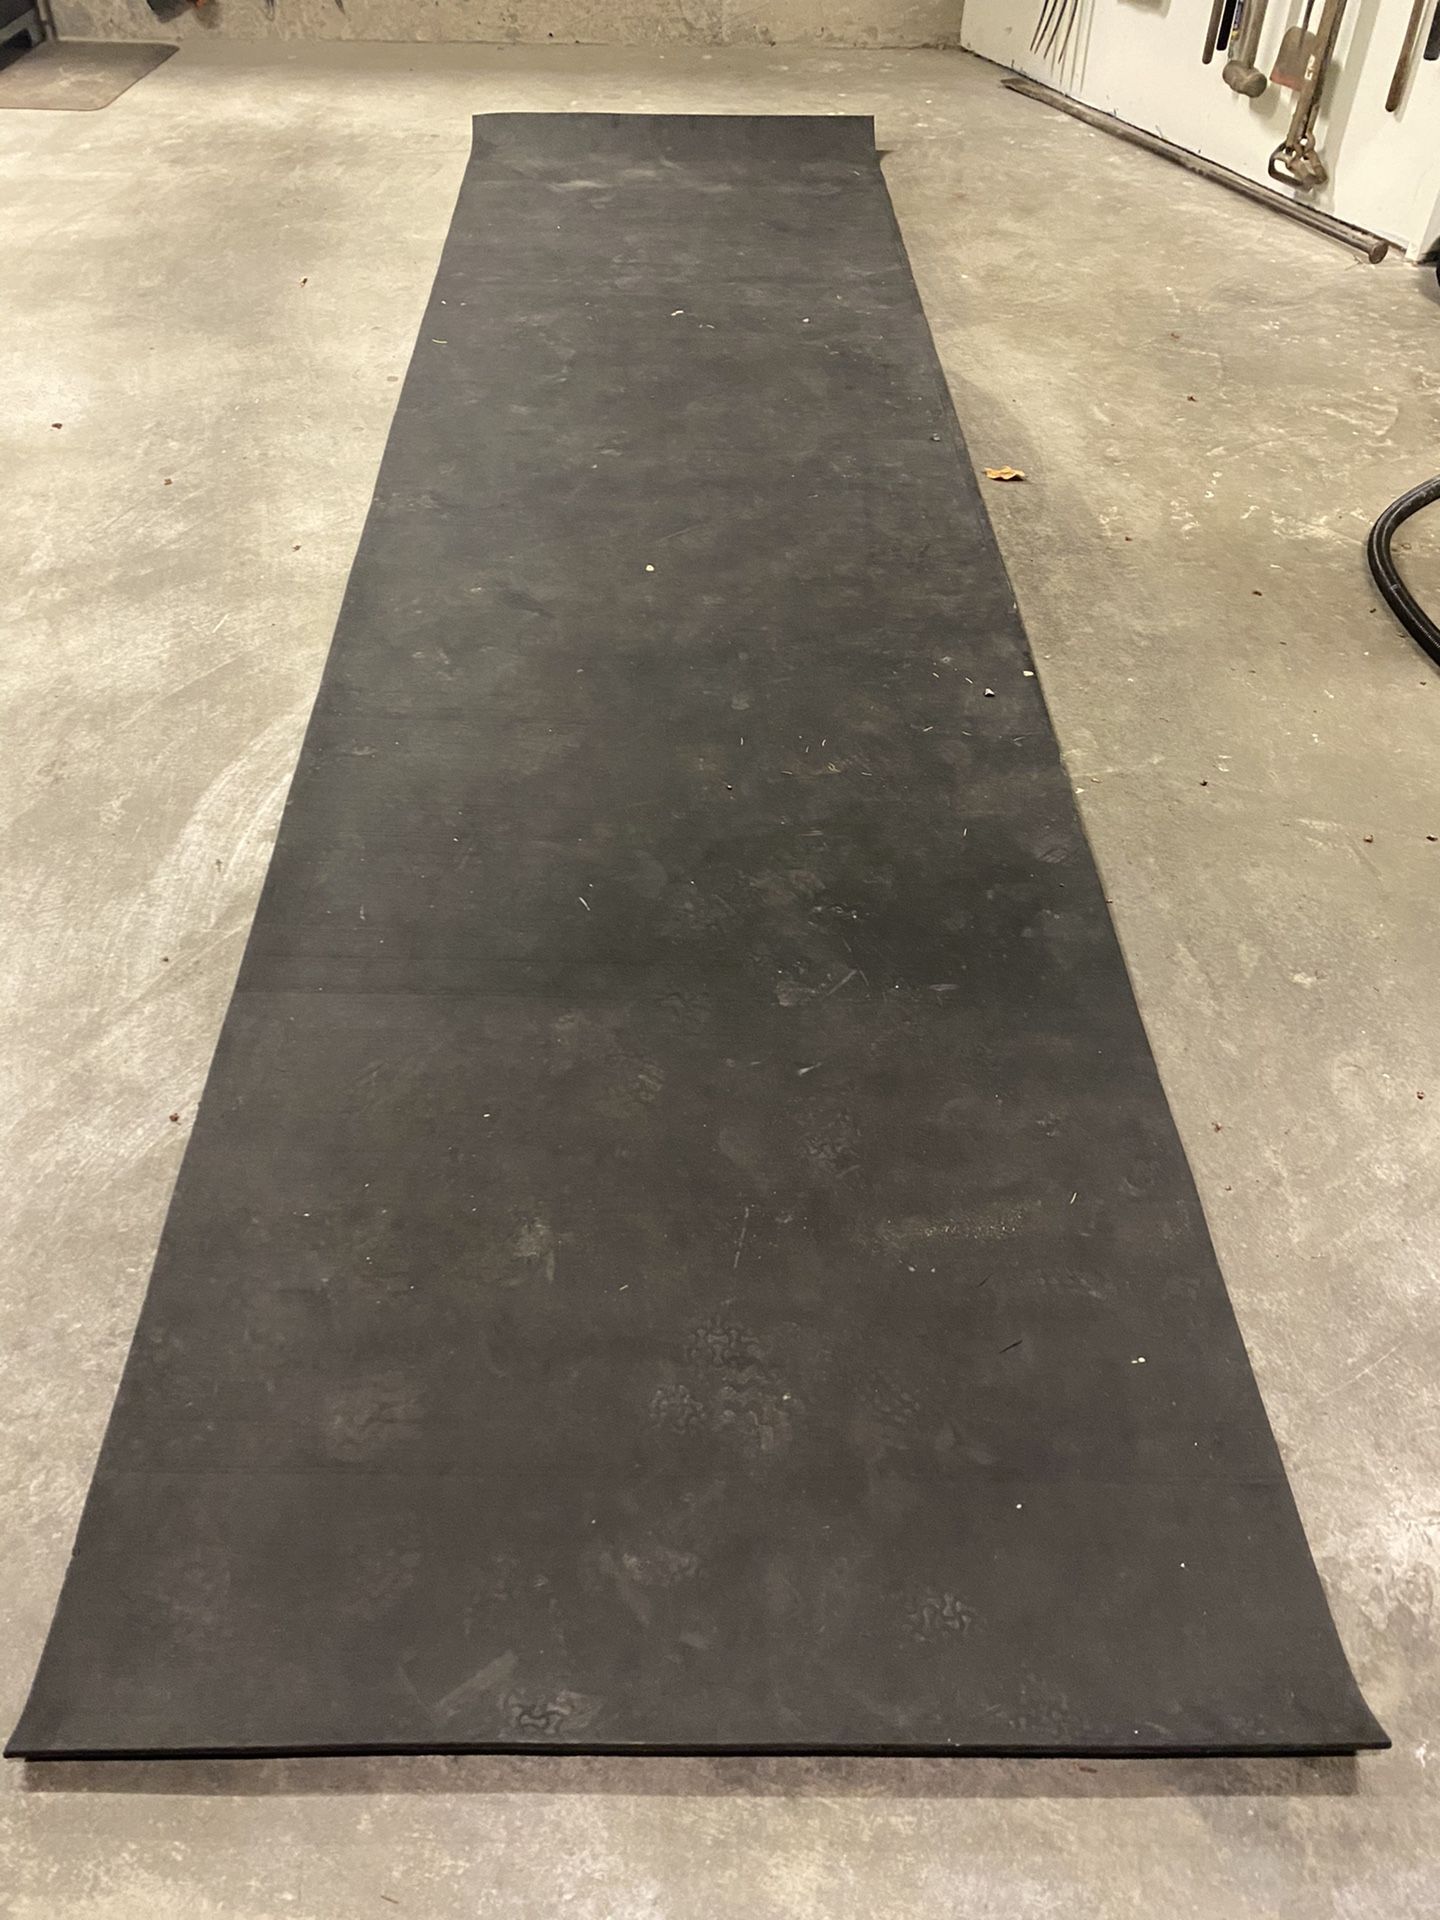 RUBBER GYM FLOORING (3 sections 4’ x 15’)